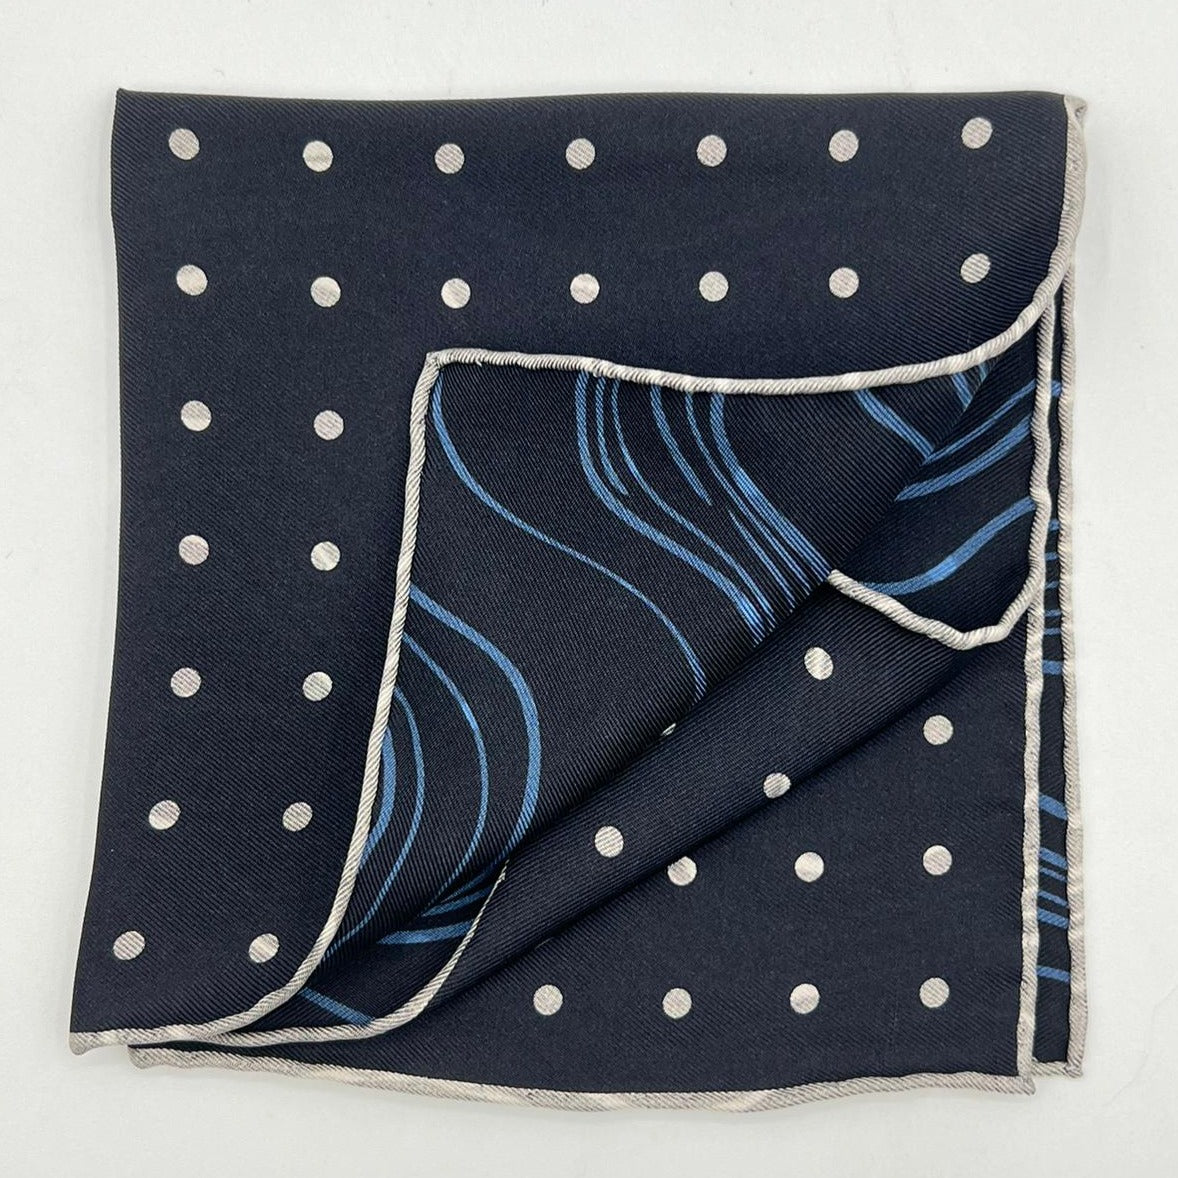 Holliday & Brown Hand-rolled   Holliday & Brown for Cruciani & Bella 100% Silk Blue and Off White Double Faces Dots Motif  Pocket Square Handmade in Italy 32 cm X 32 cm